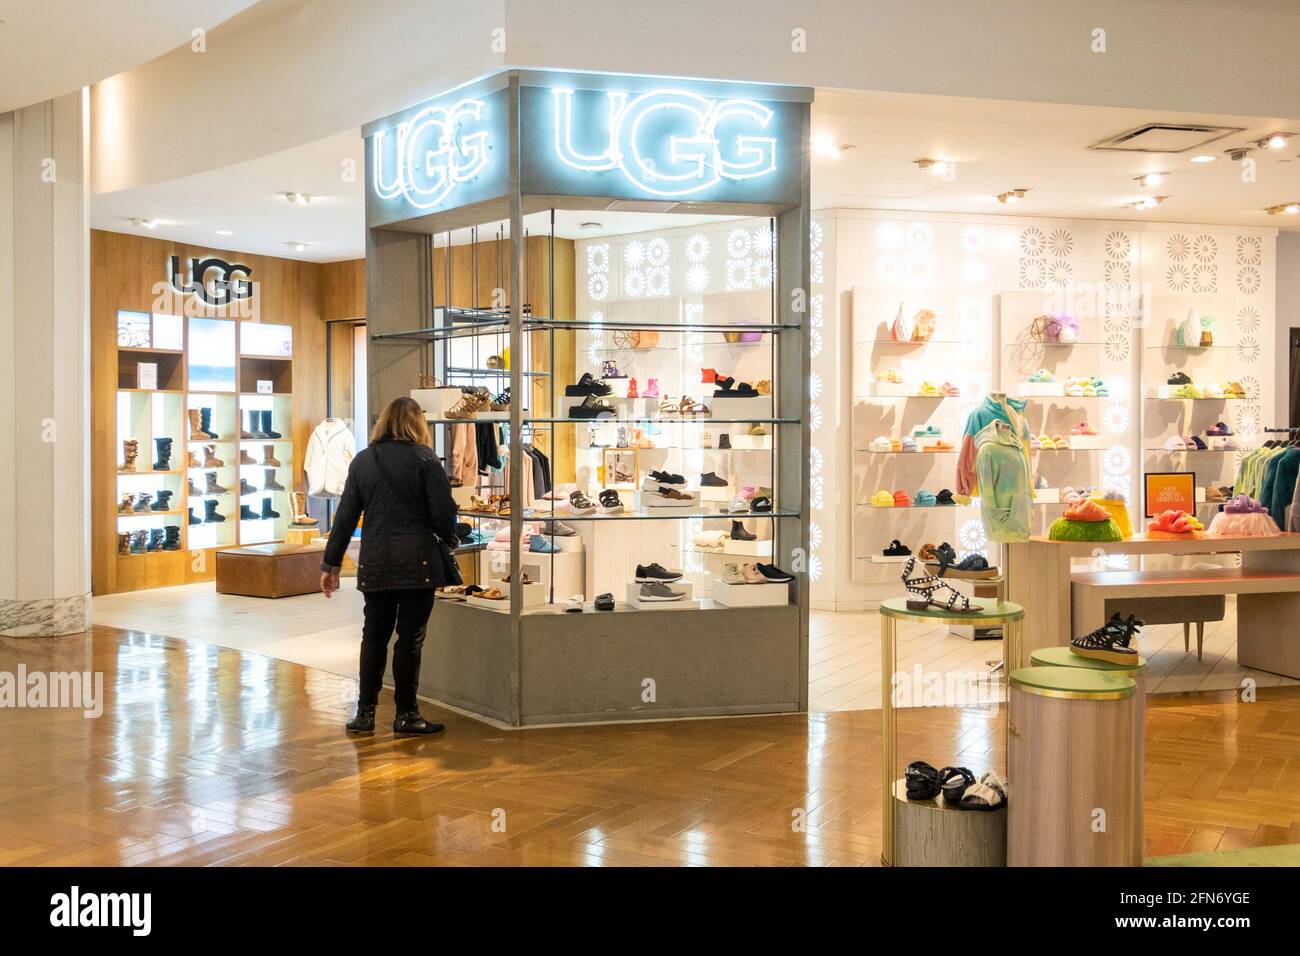 Shoe Store Interior High Resolution Stock Photography and Images - Alamy